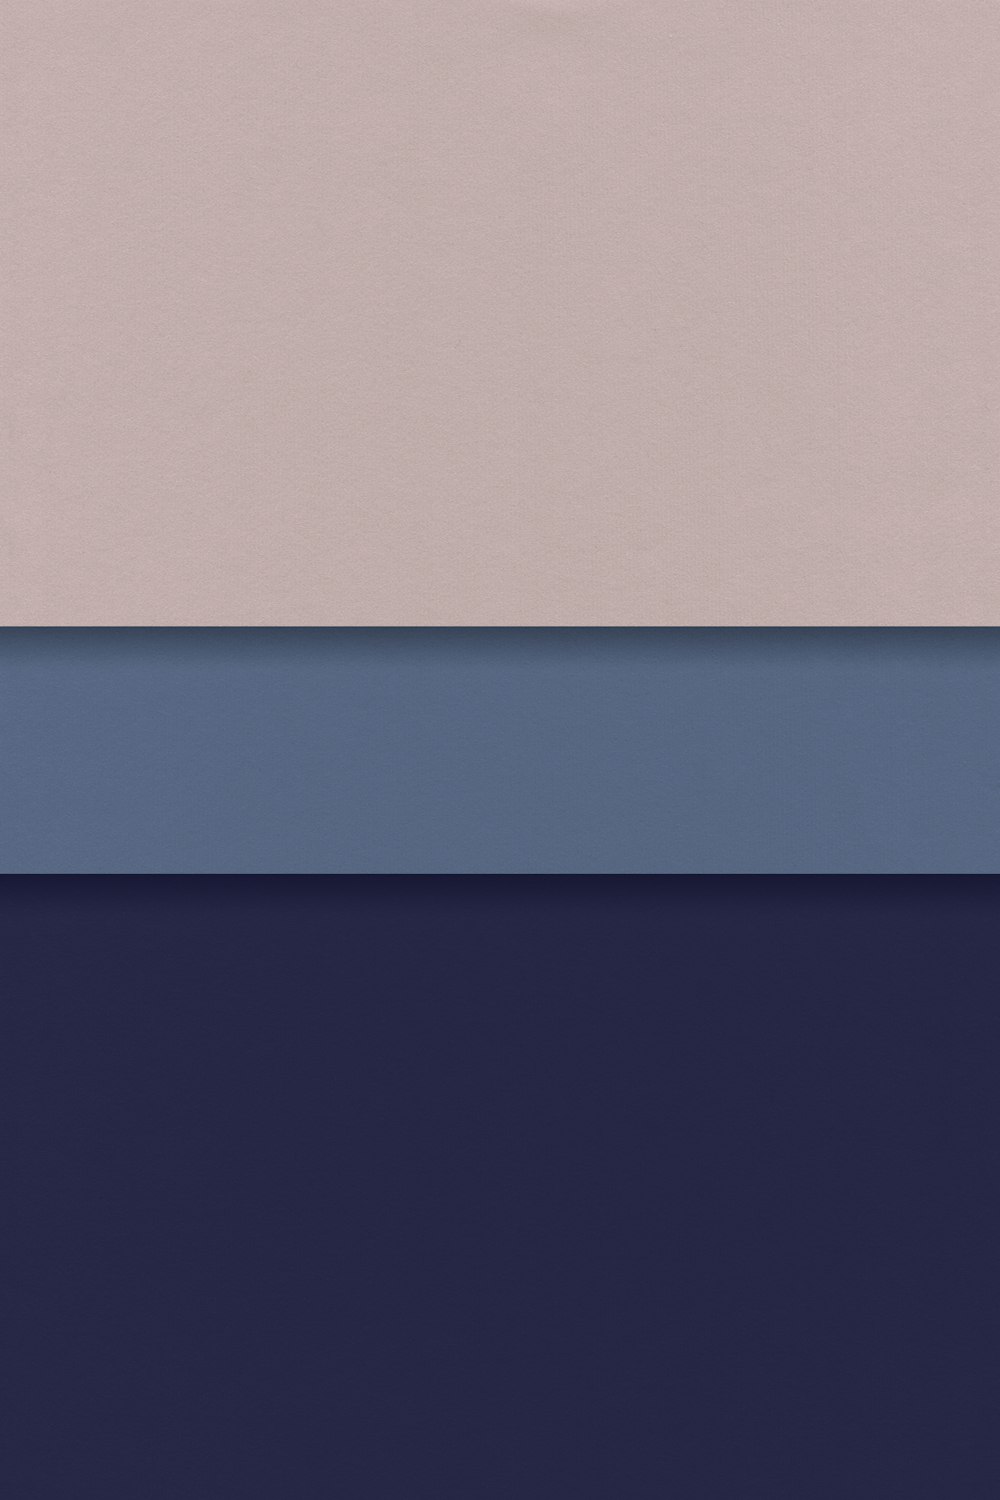 a group of three different colors of paper